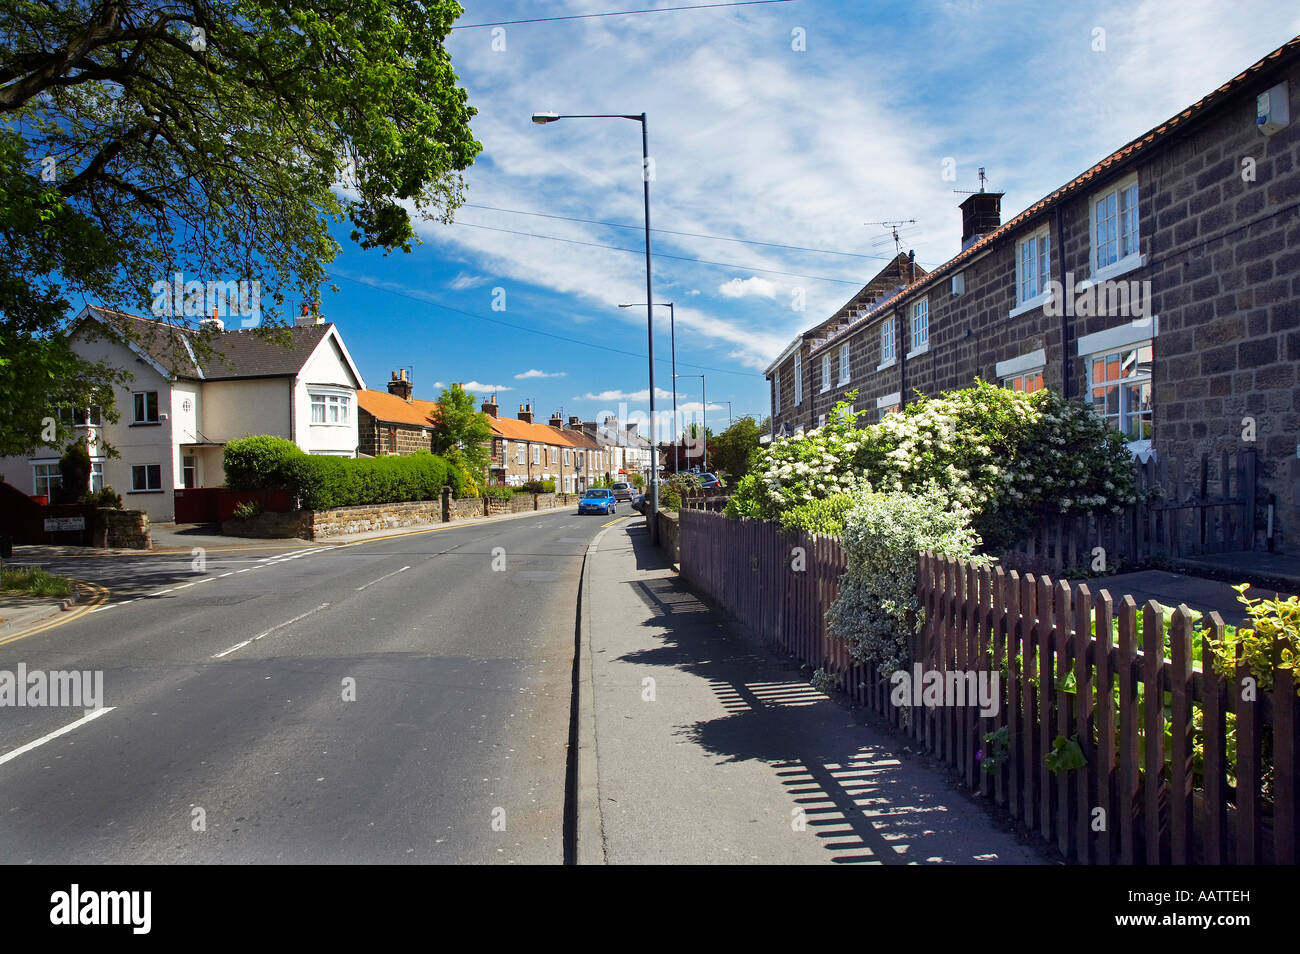 https://c8.alamy.com/comp/AATTEH/the-high-street-normanby-eston-redcar-and-cleveland-north-east-england-AATTEH.jpg